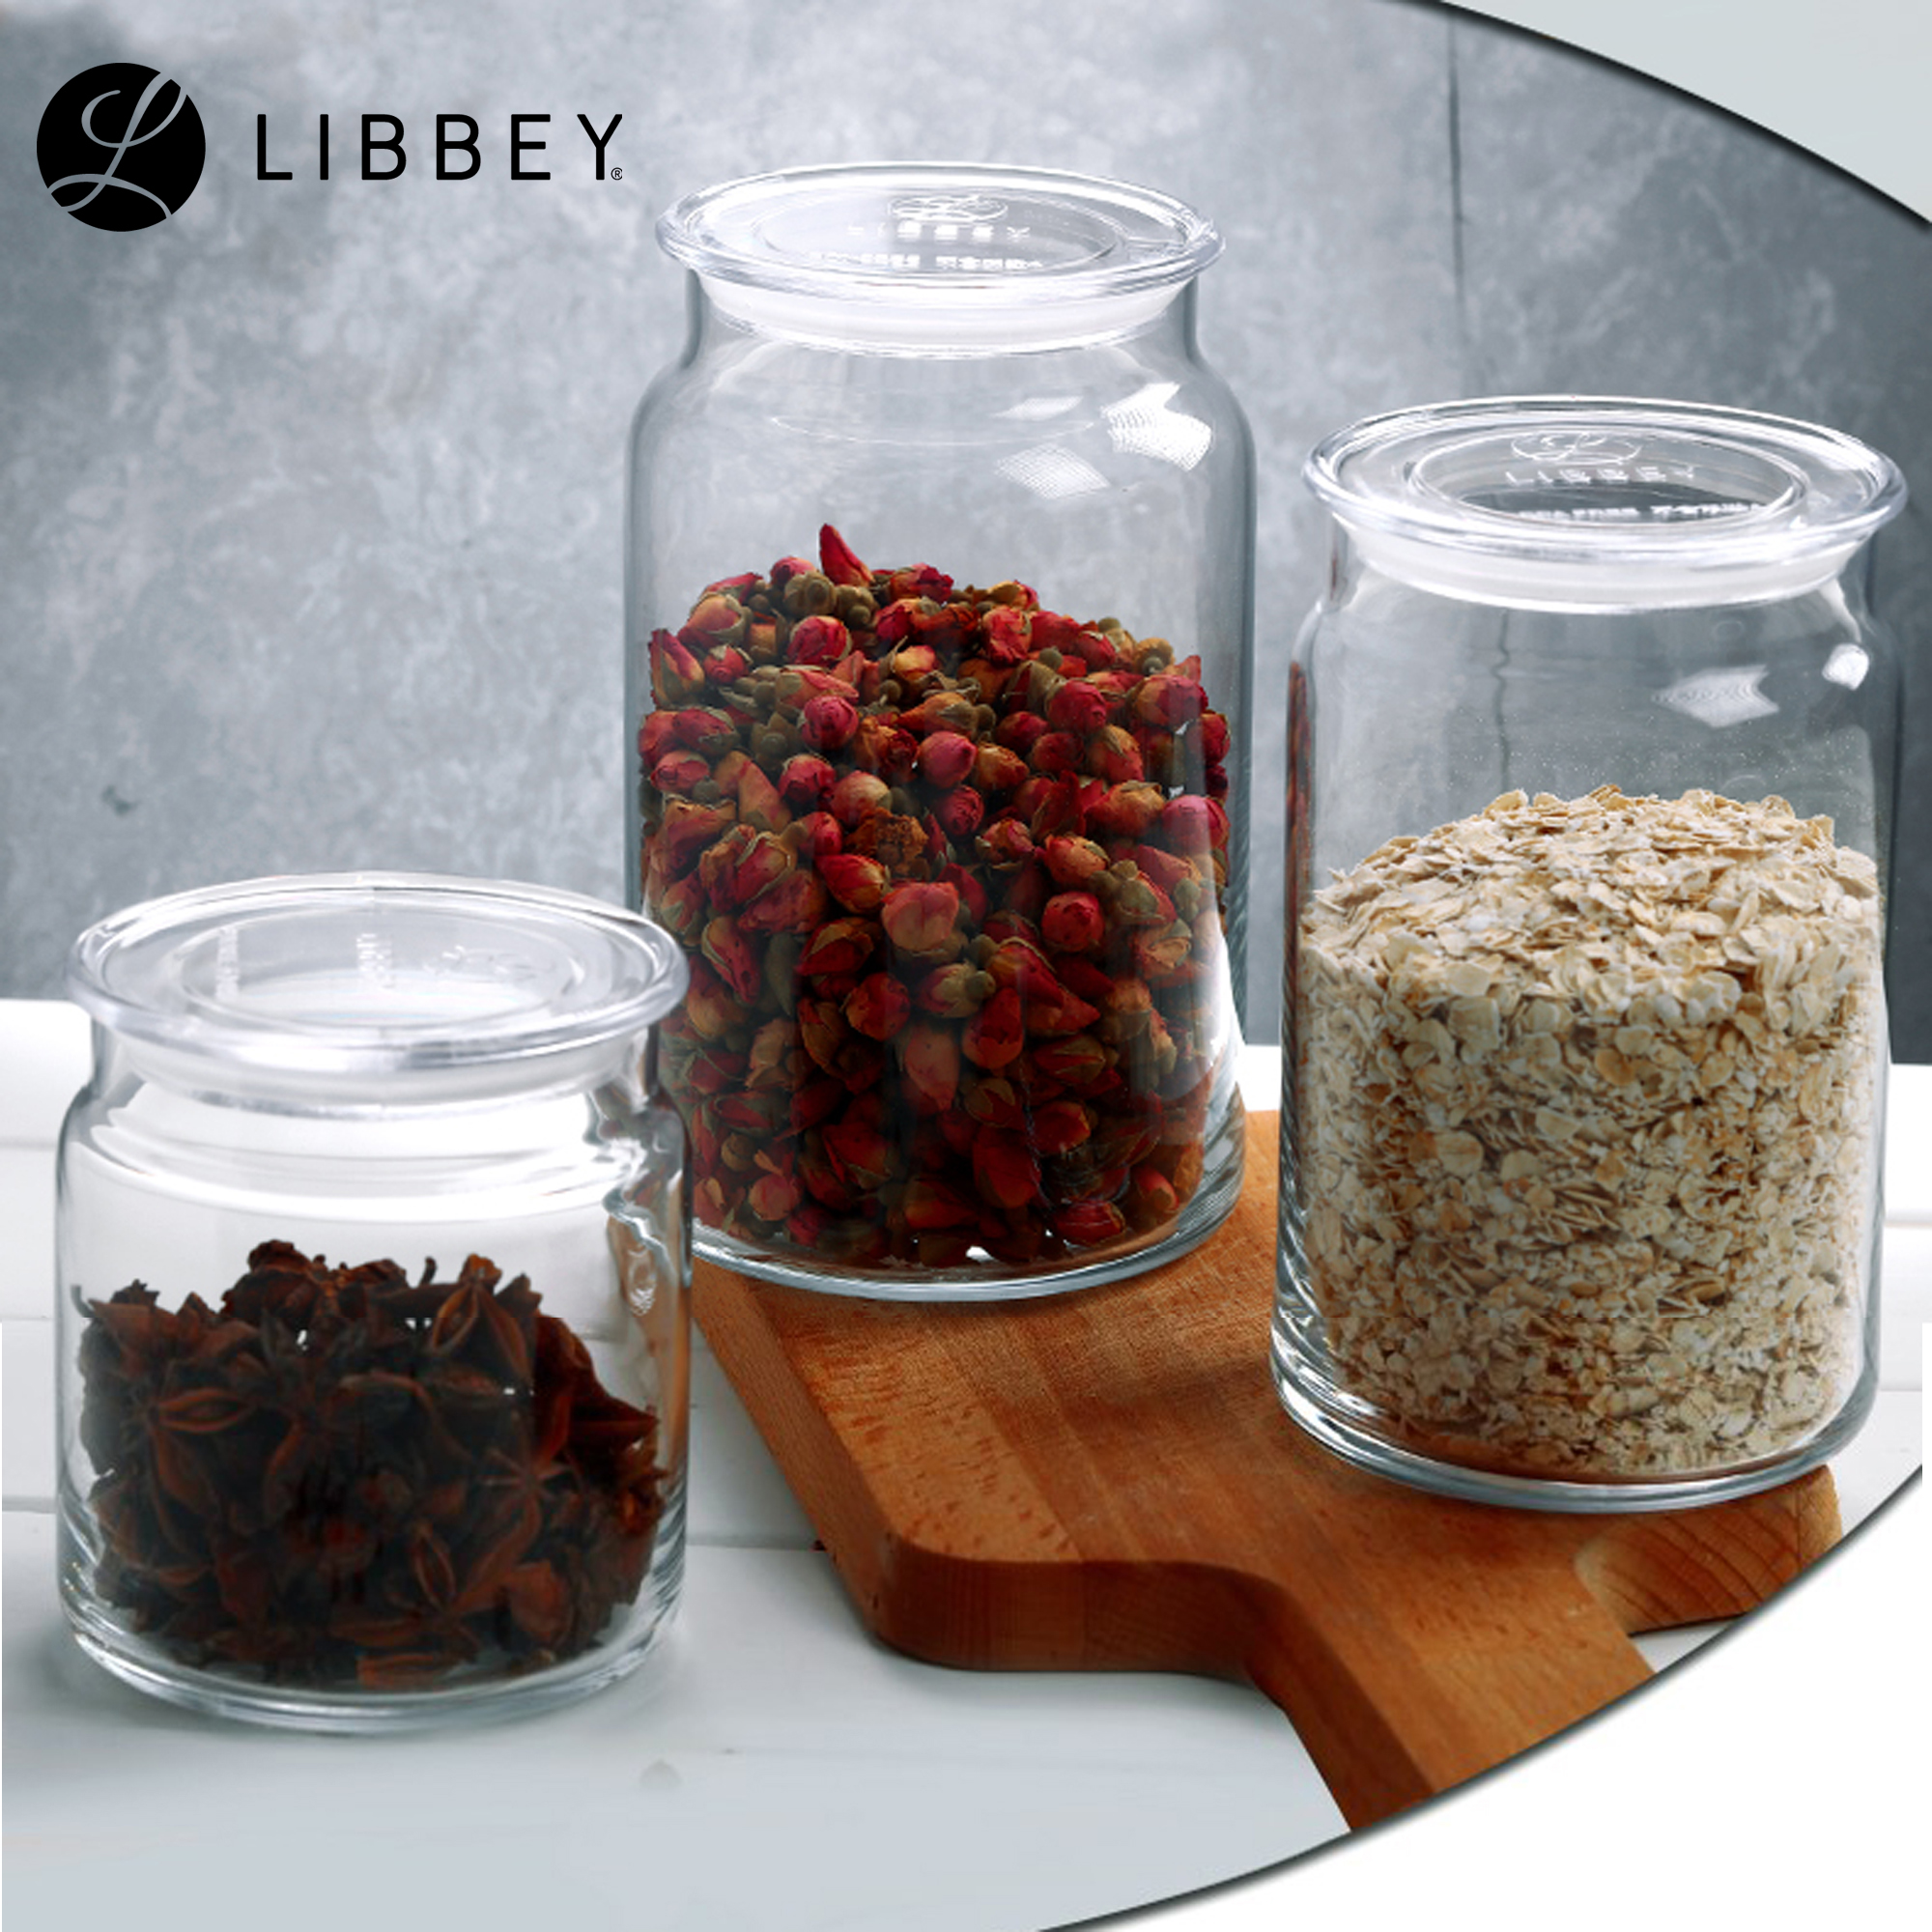 Libbey Classic Glass Food Storage Container Jar 2-pc Set